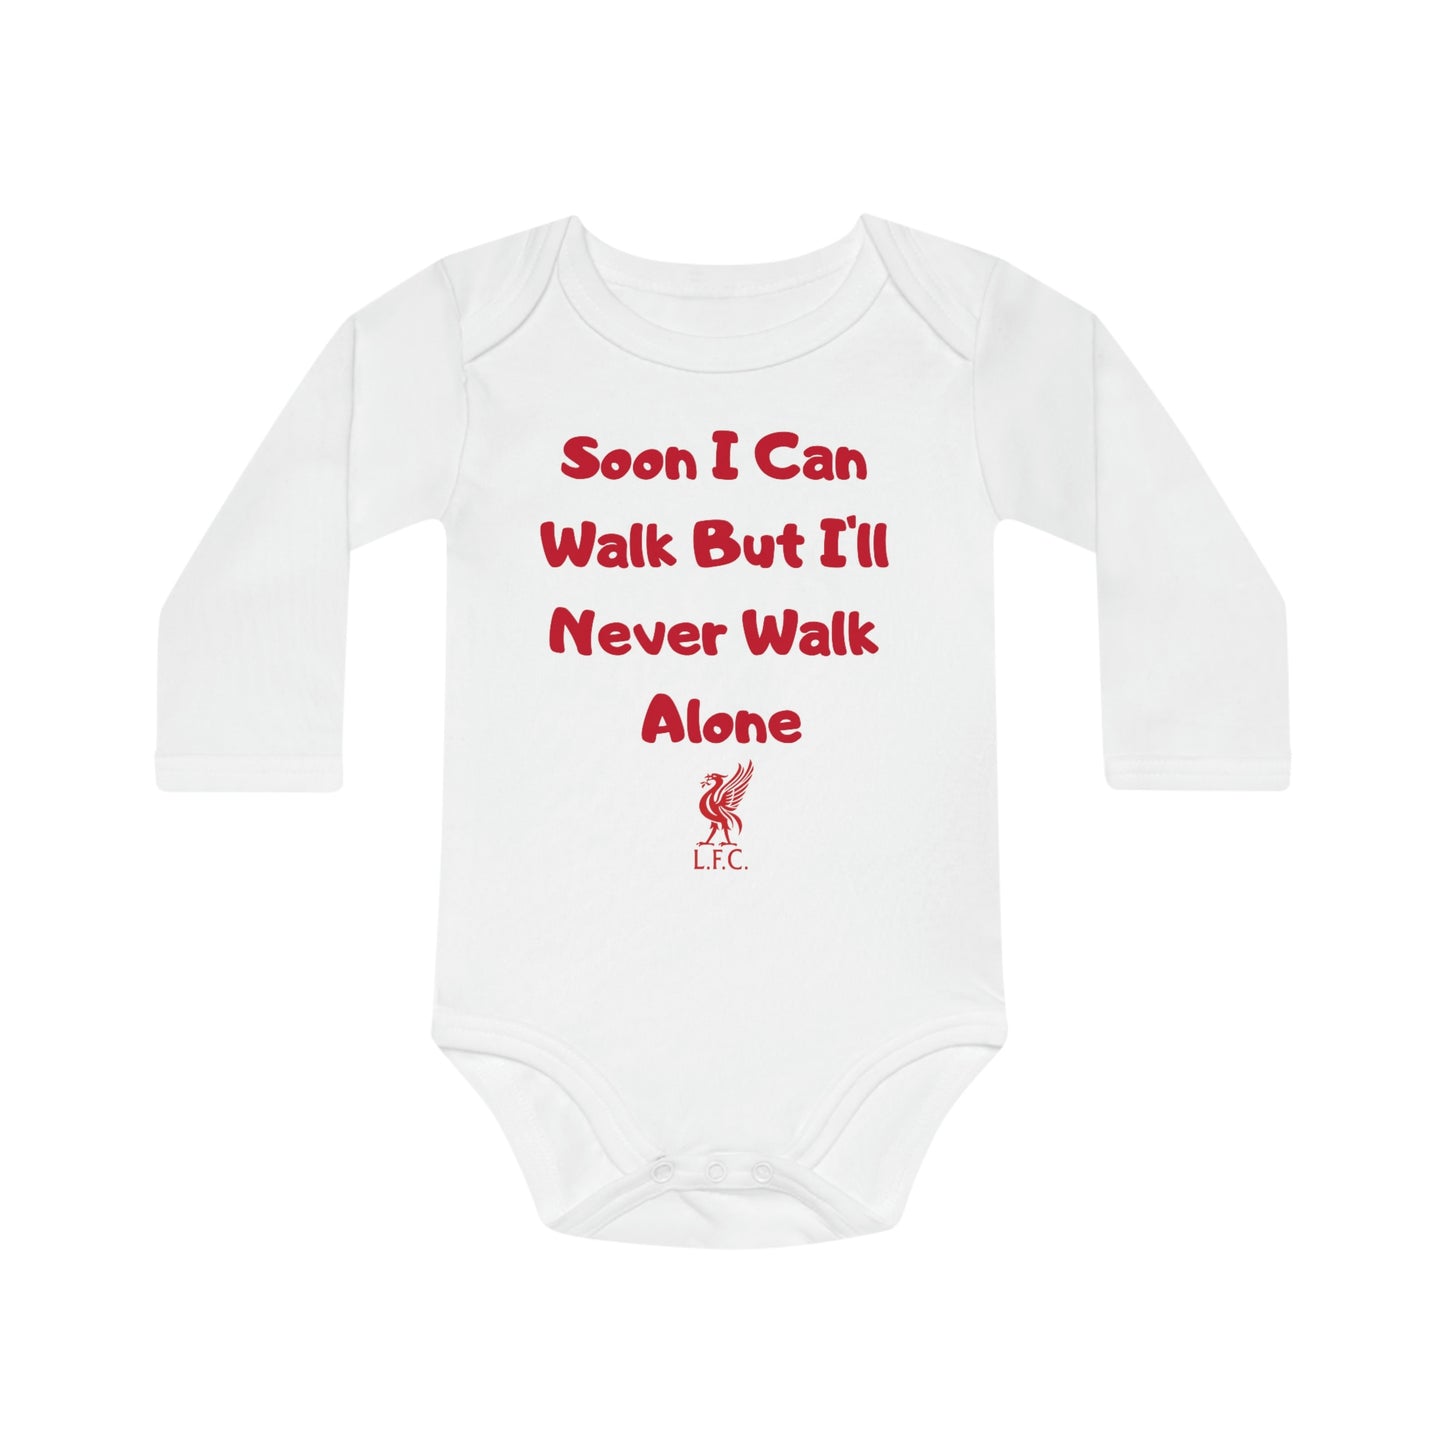 Soon I Can Walk But I'll Never Walk Alone - Liverpool Supporter Body